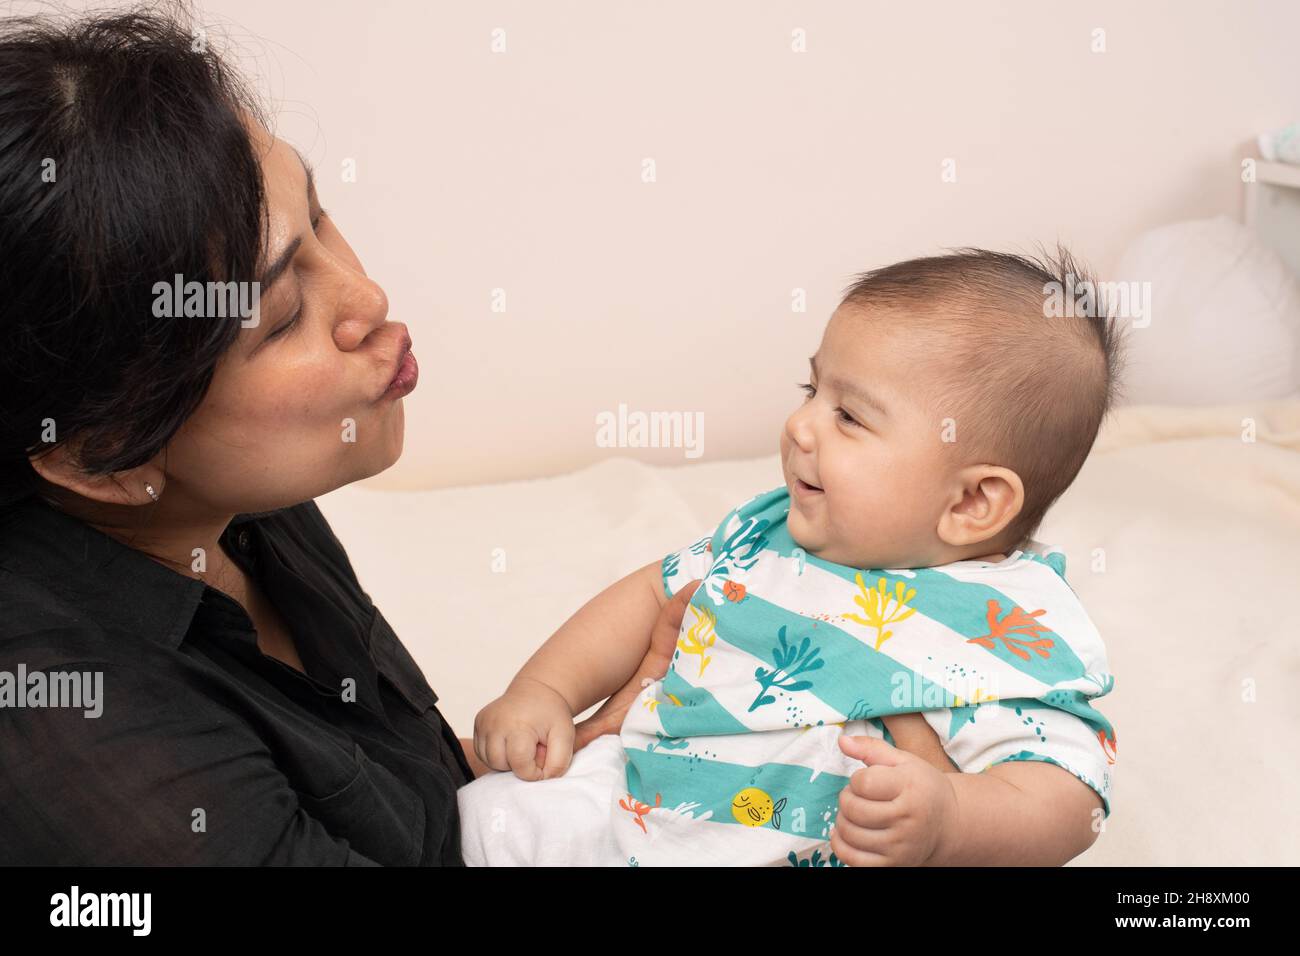 3 month old baby boy interaction with mother smiling as she makes sound with her lips Stock Photo